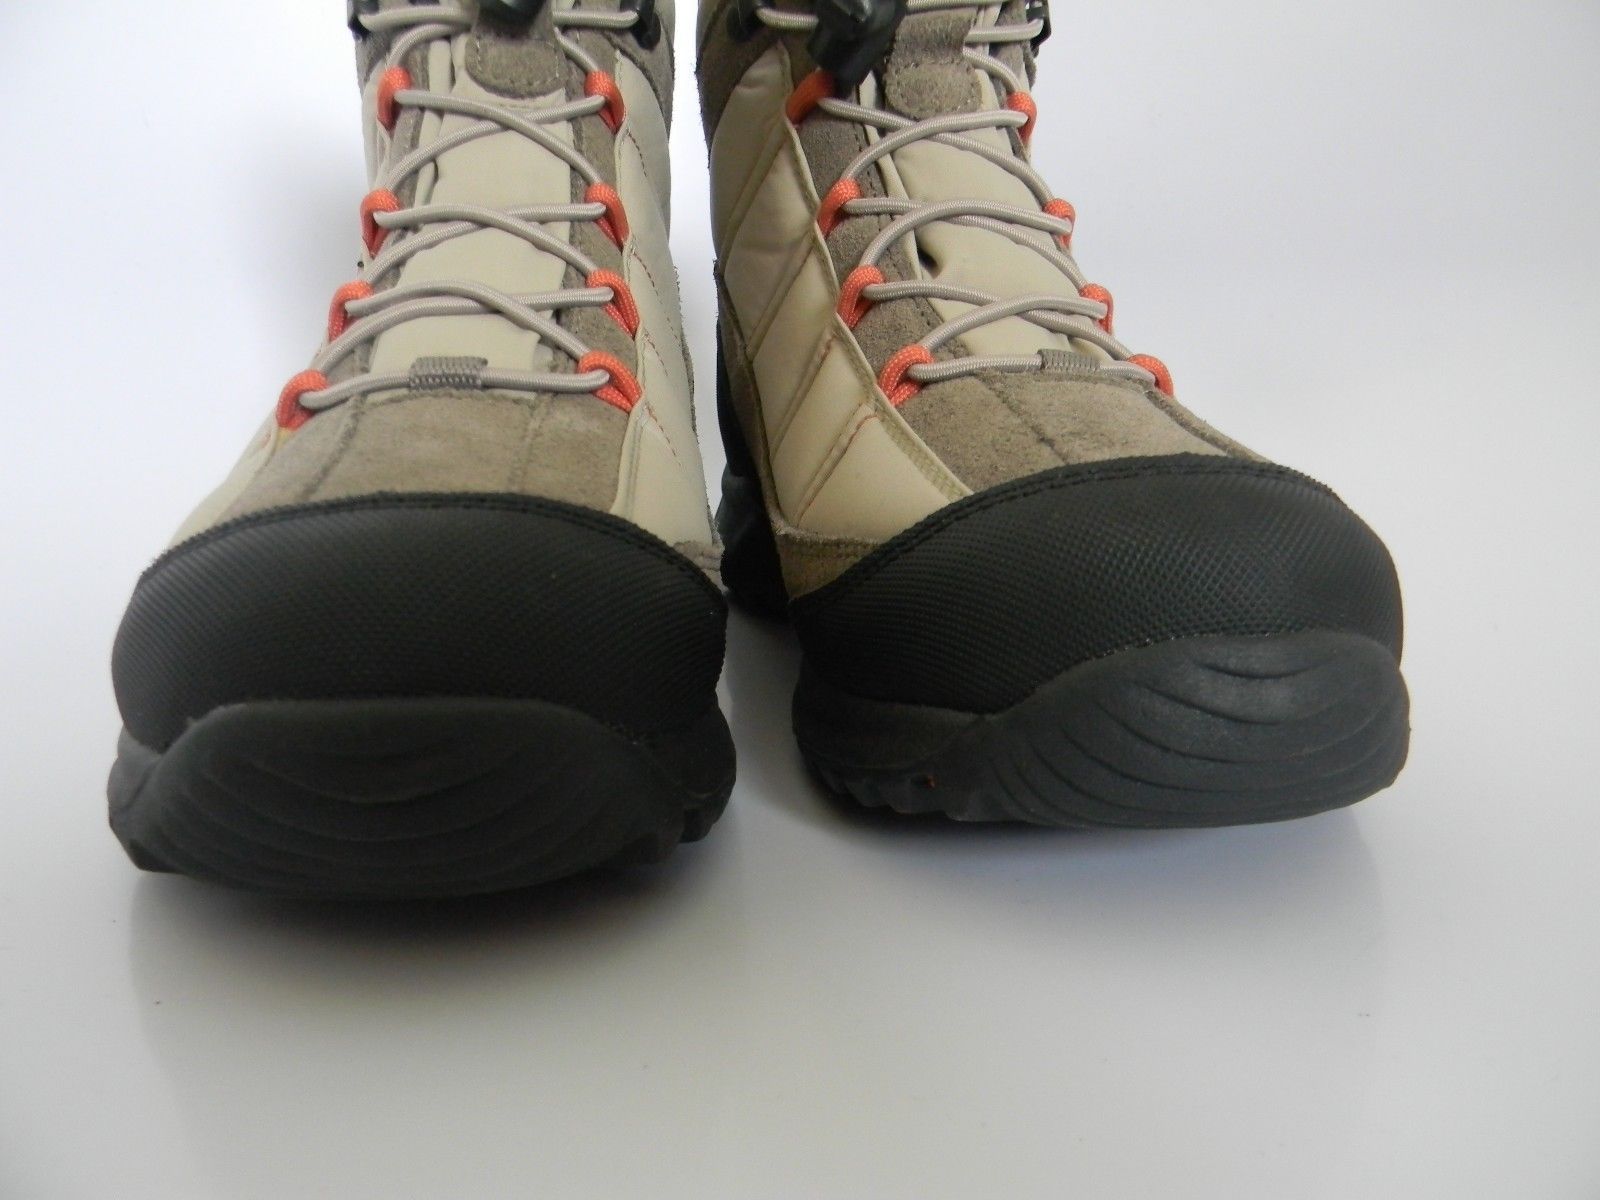 lands end hiking boots women's